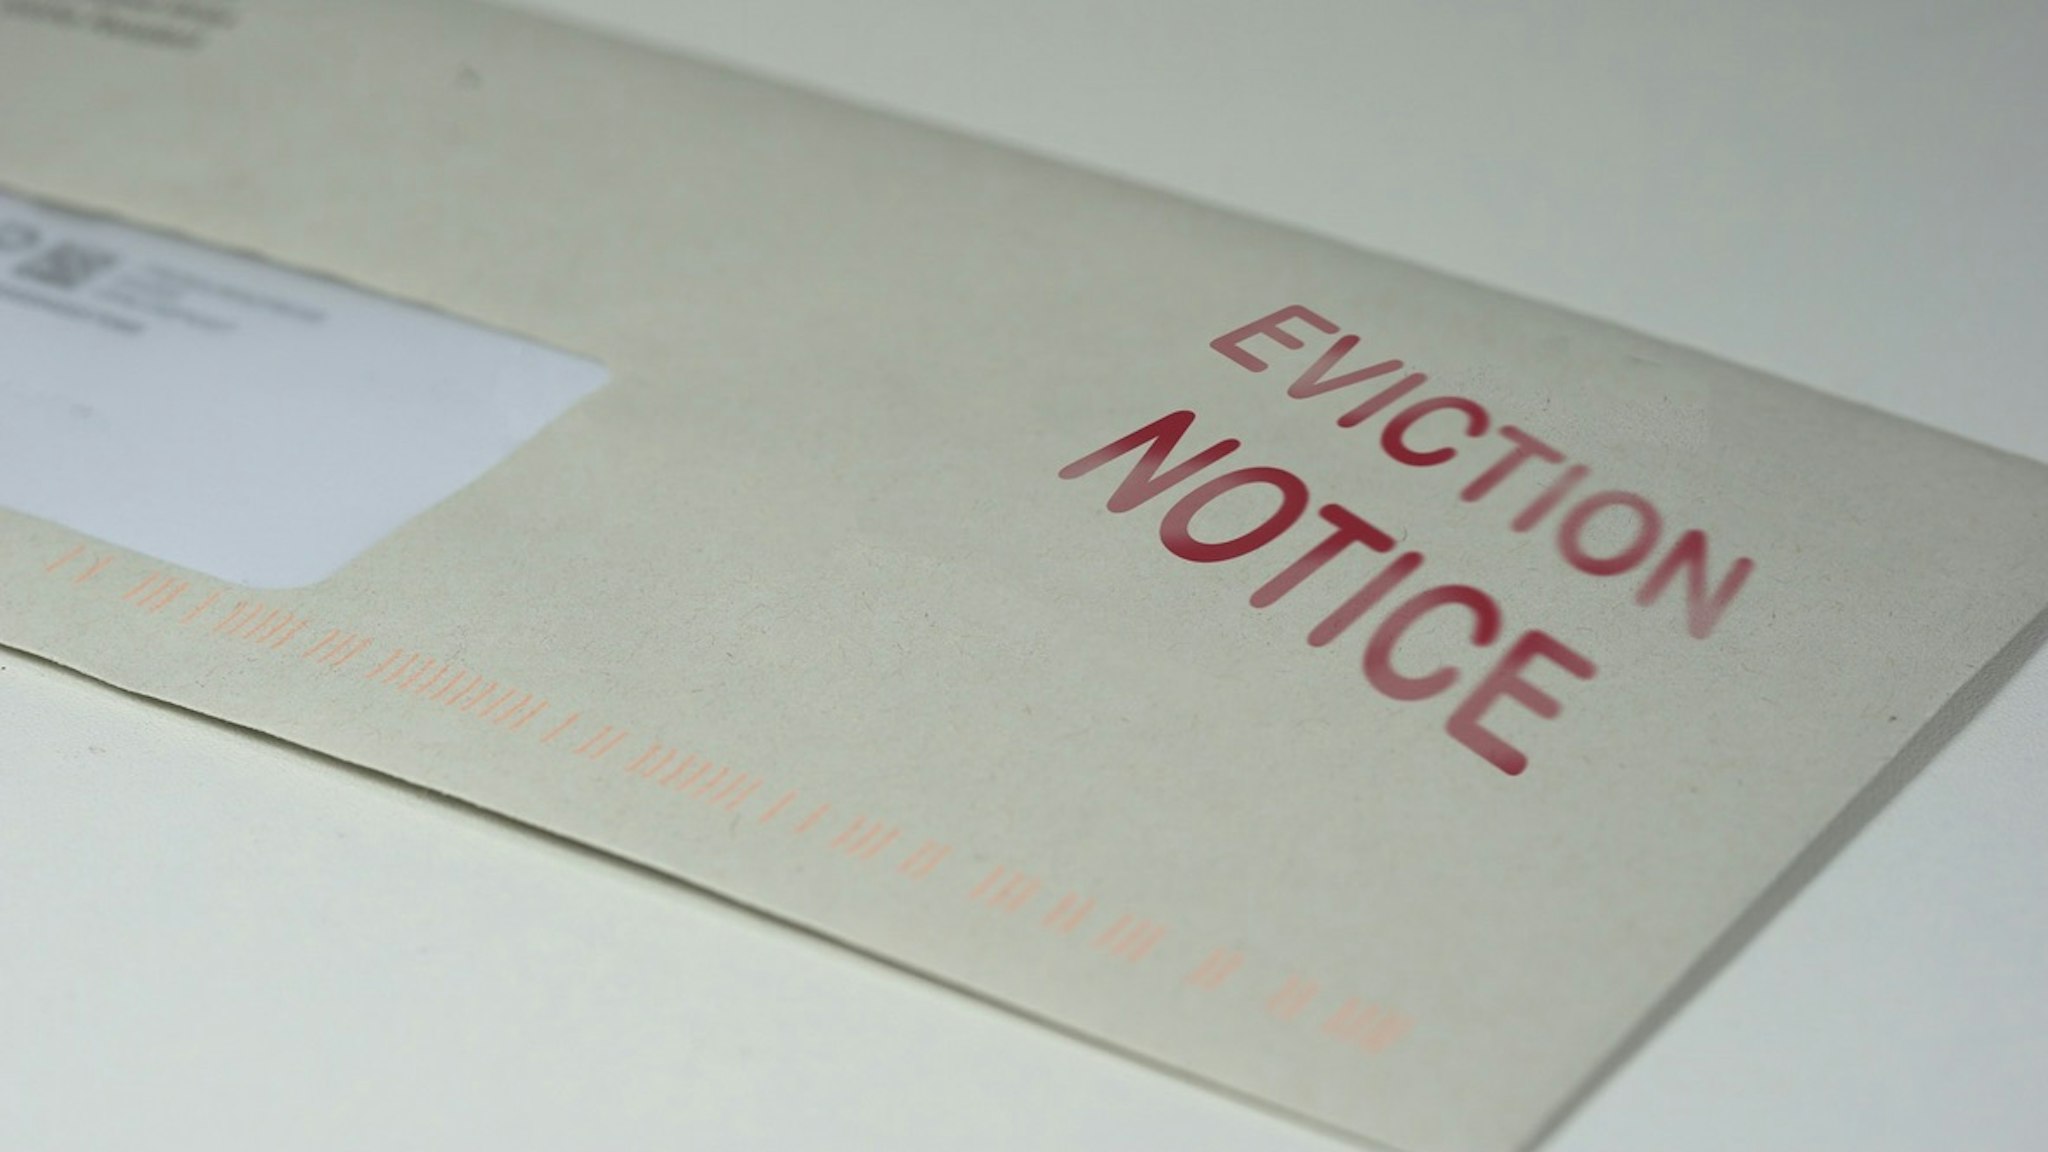 Envelop for an eviction notice to a defaulting renter in due to missed rent in recession - stock photo Envelop for an eviction notice to a defaulting renter in due to missed rent in recession No-Mad via Getty Images